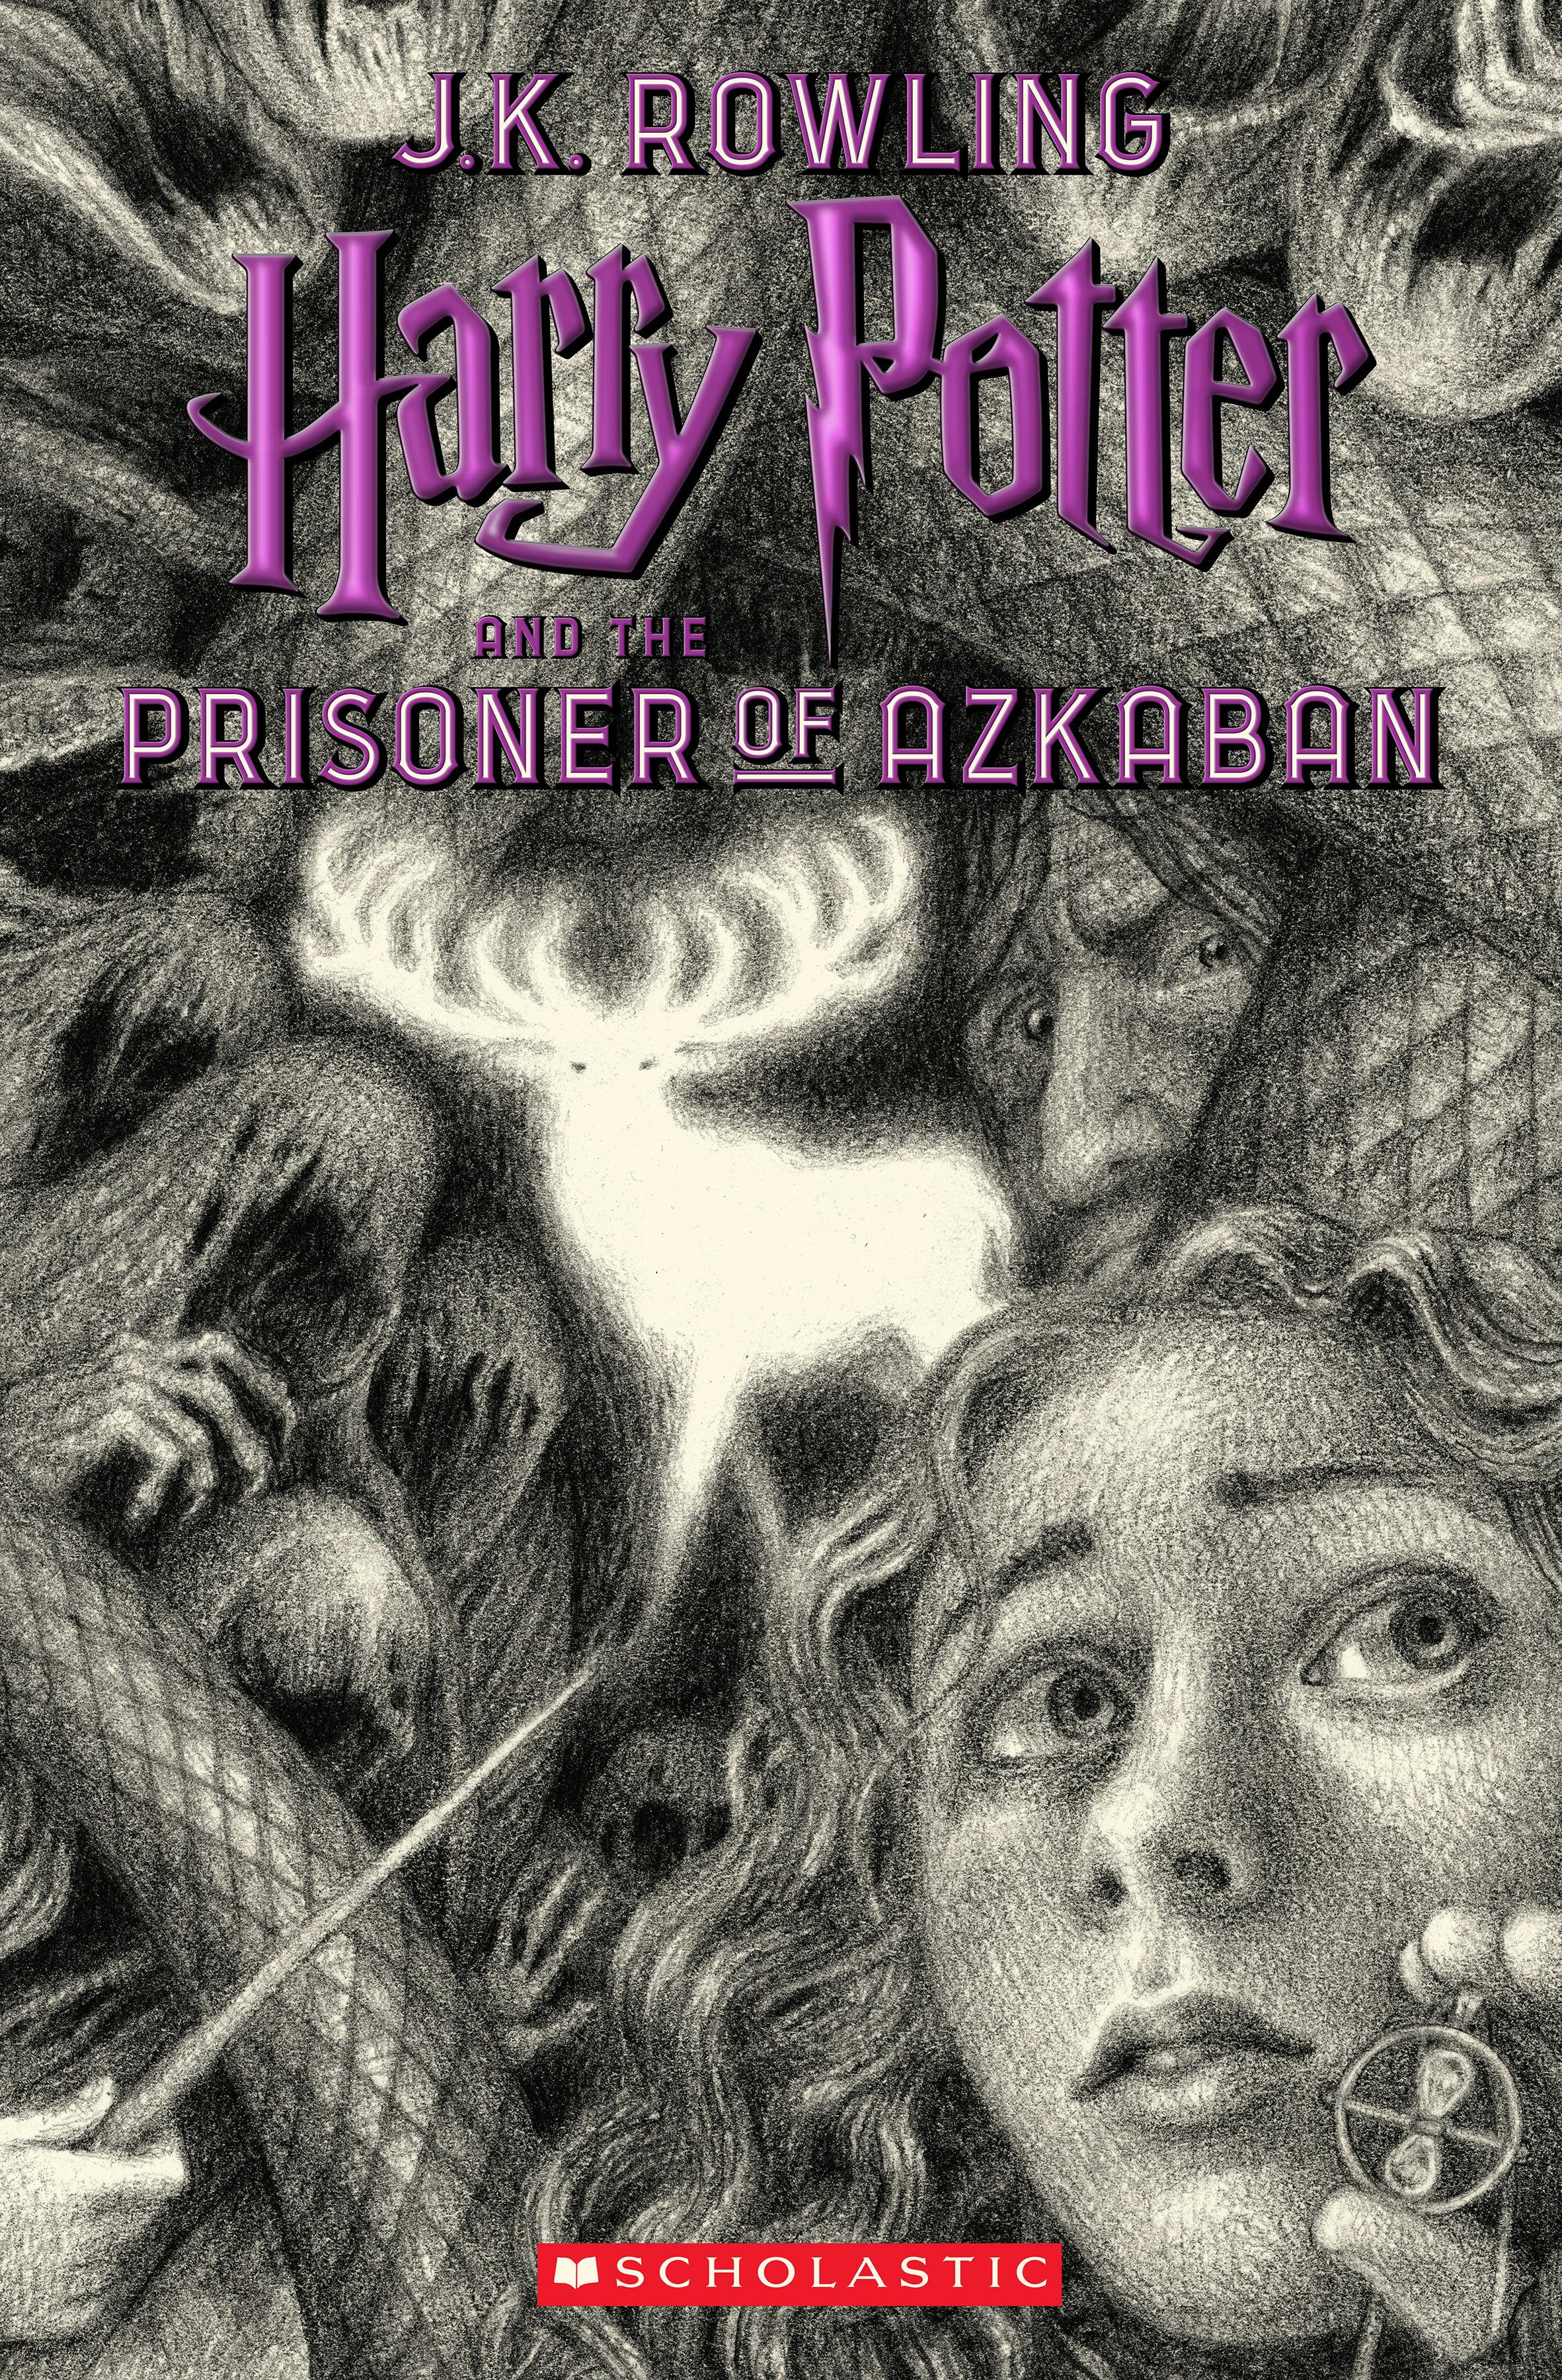 The Newest 'Harry Potter' Book Covers Are Beautifully Detailed